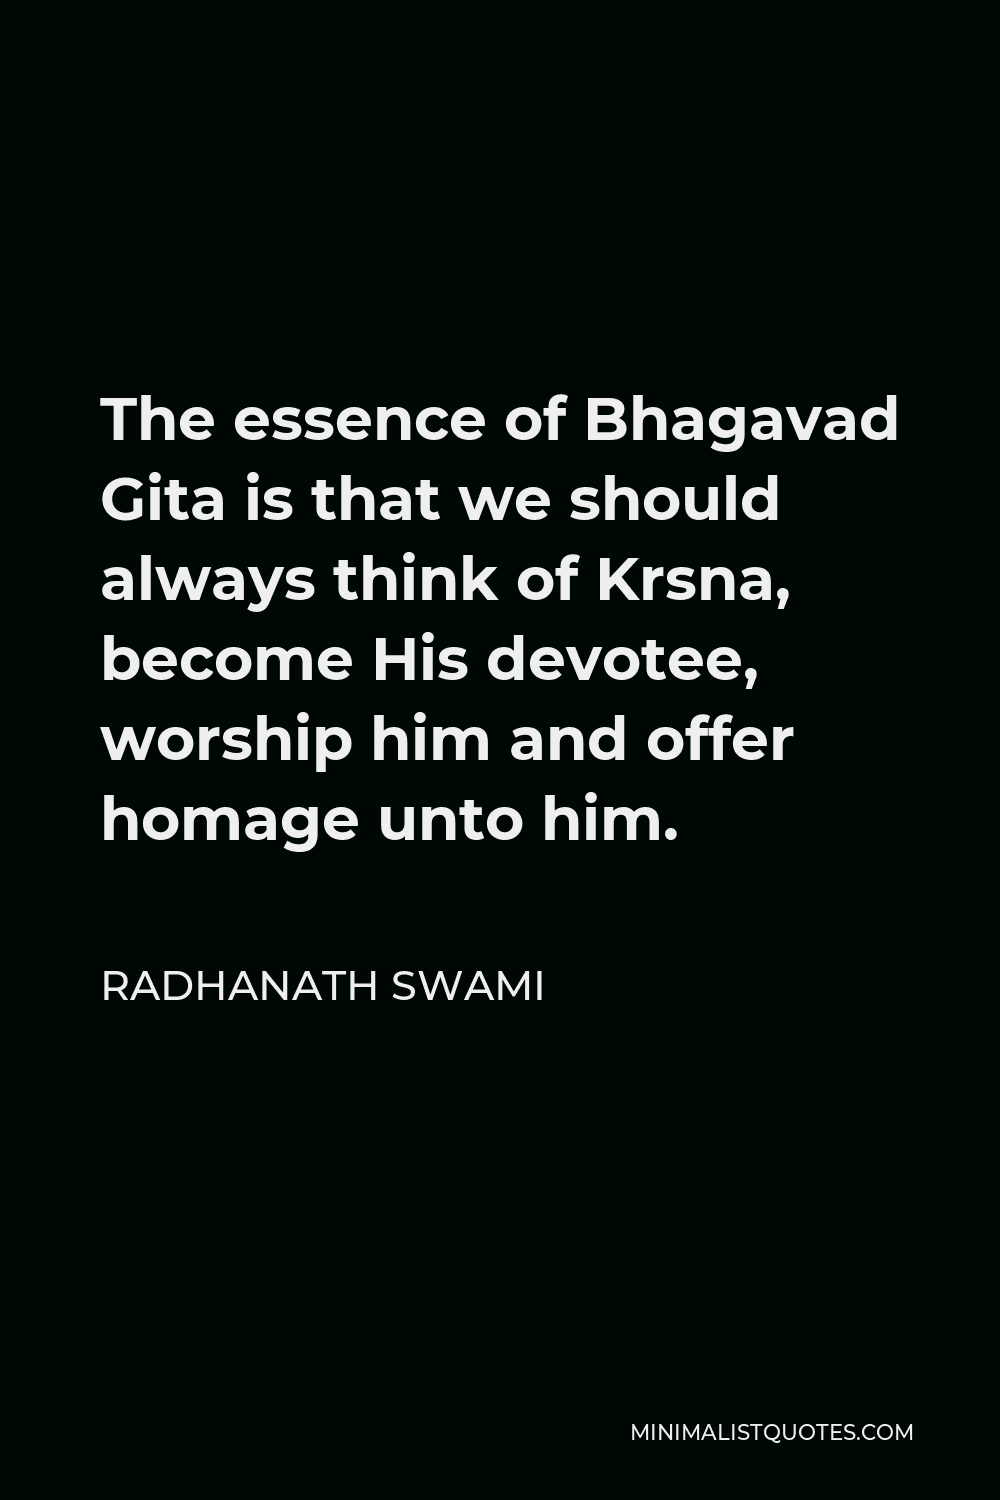 Radhanath Swami Quote - The essence of Bhagavad Gita is that we should always think of Krsna, become His devotee, worship him and offer homage unto him.